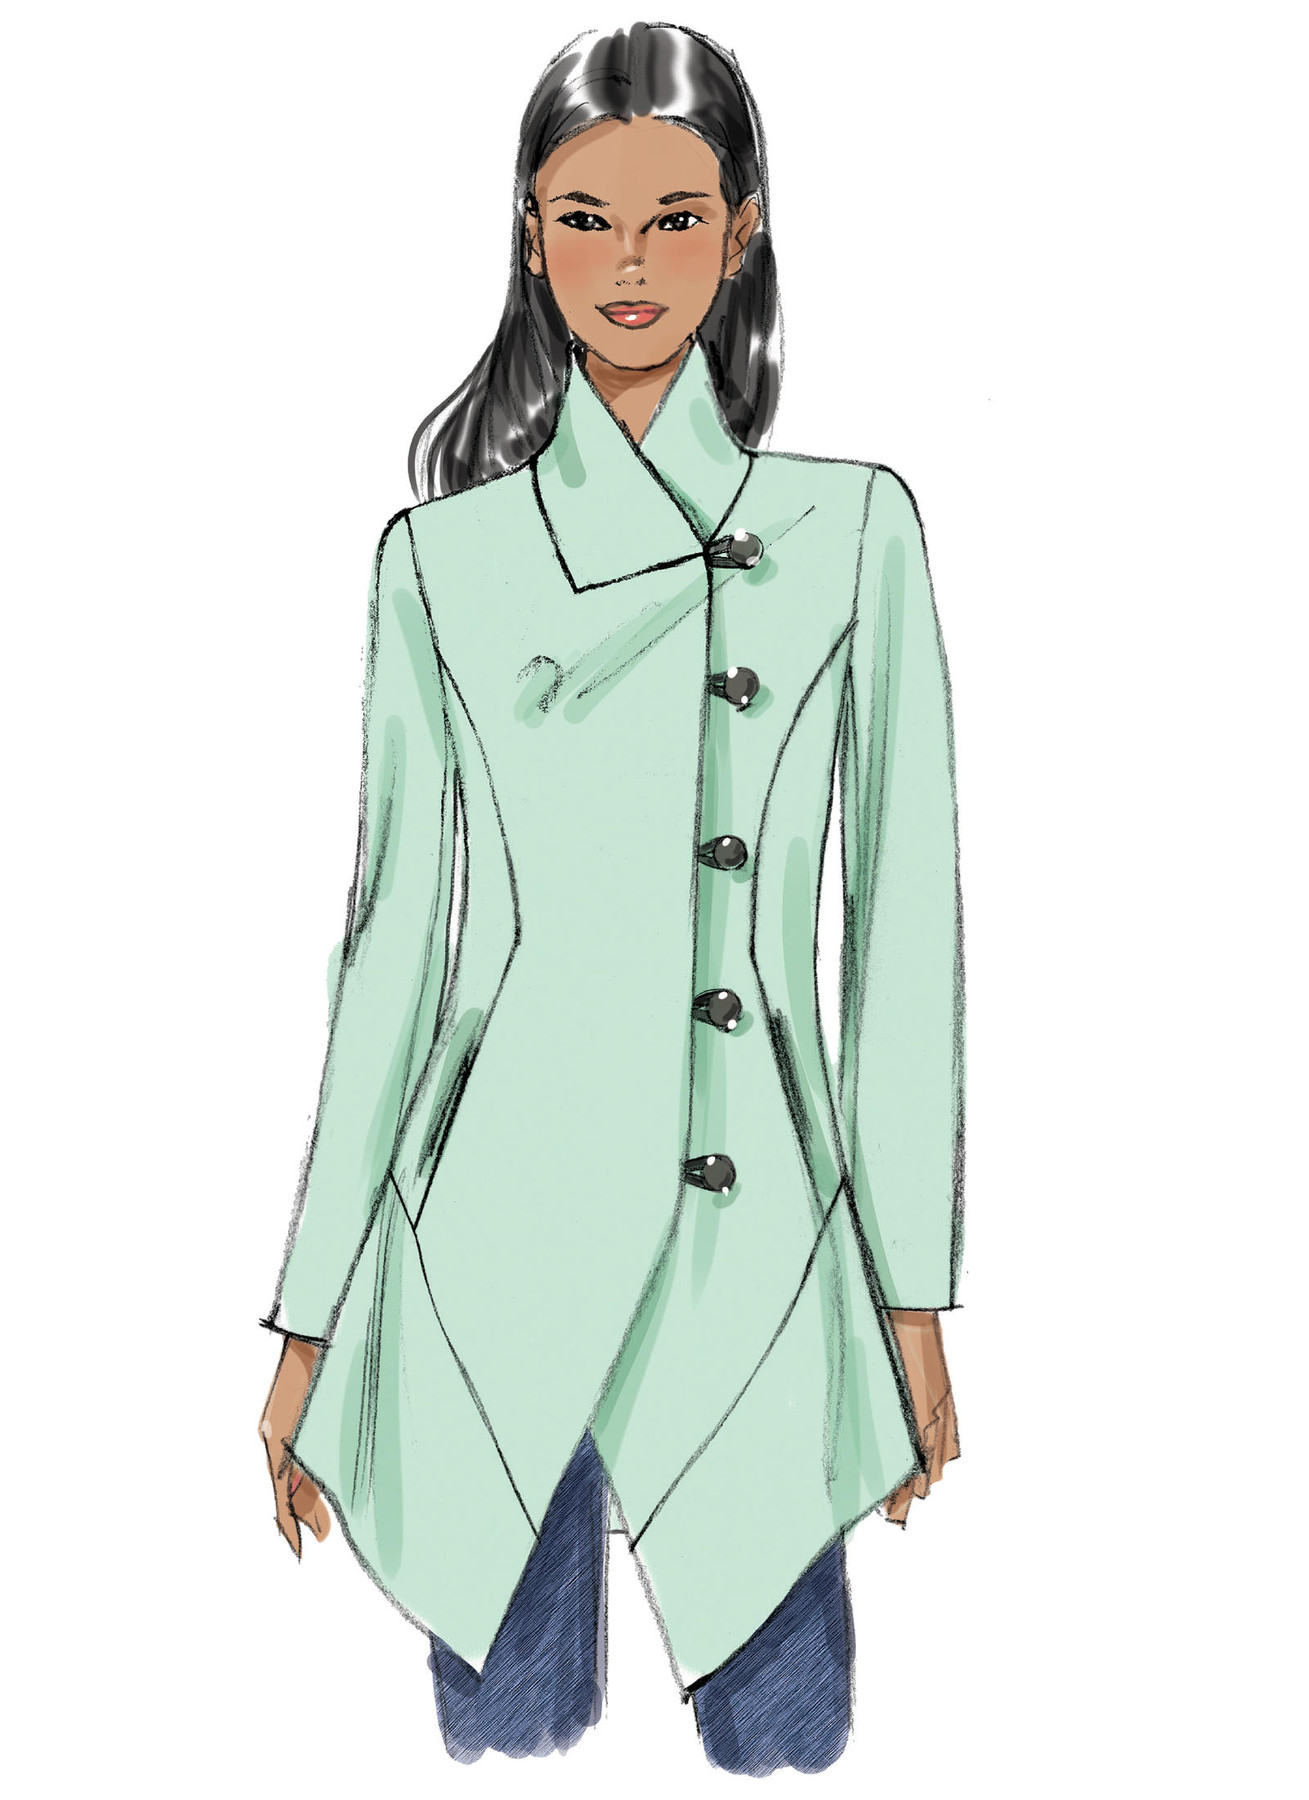 V9212 | Misses' Seamed and Collared Jackets | Vogue Patterns